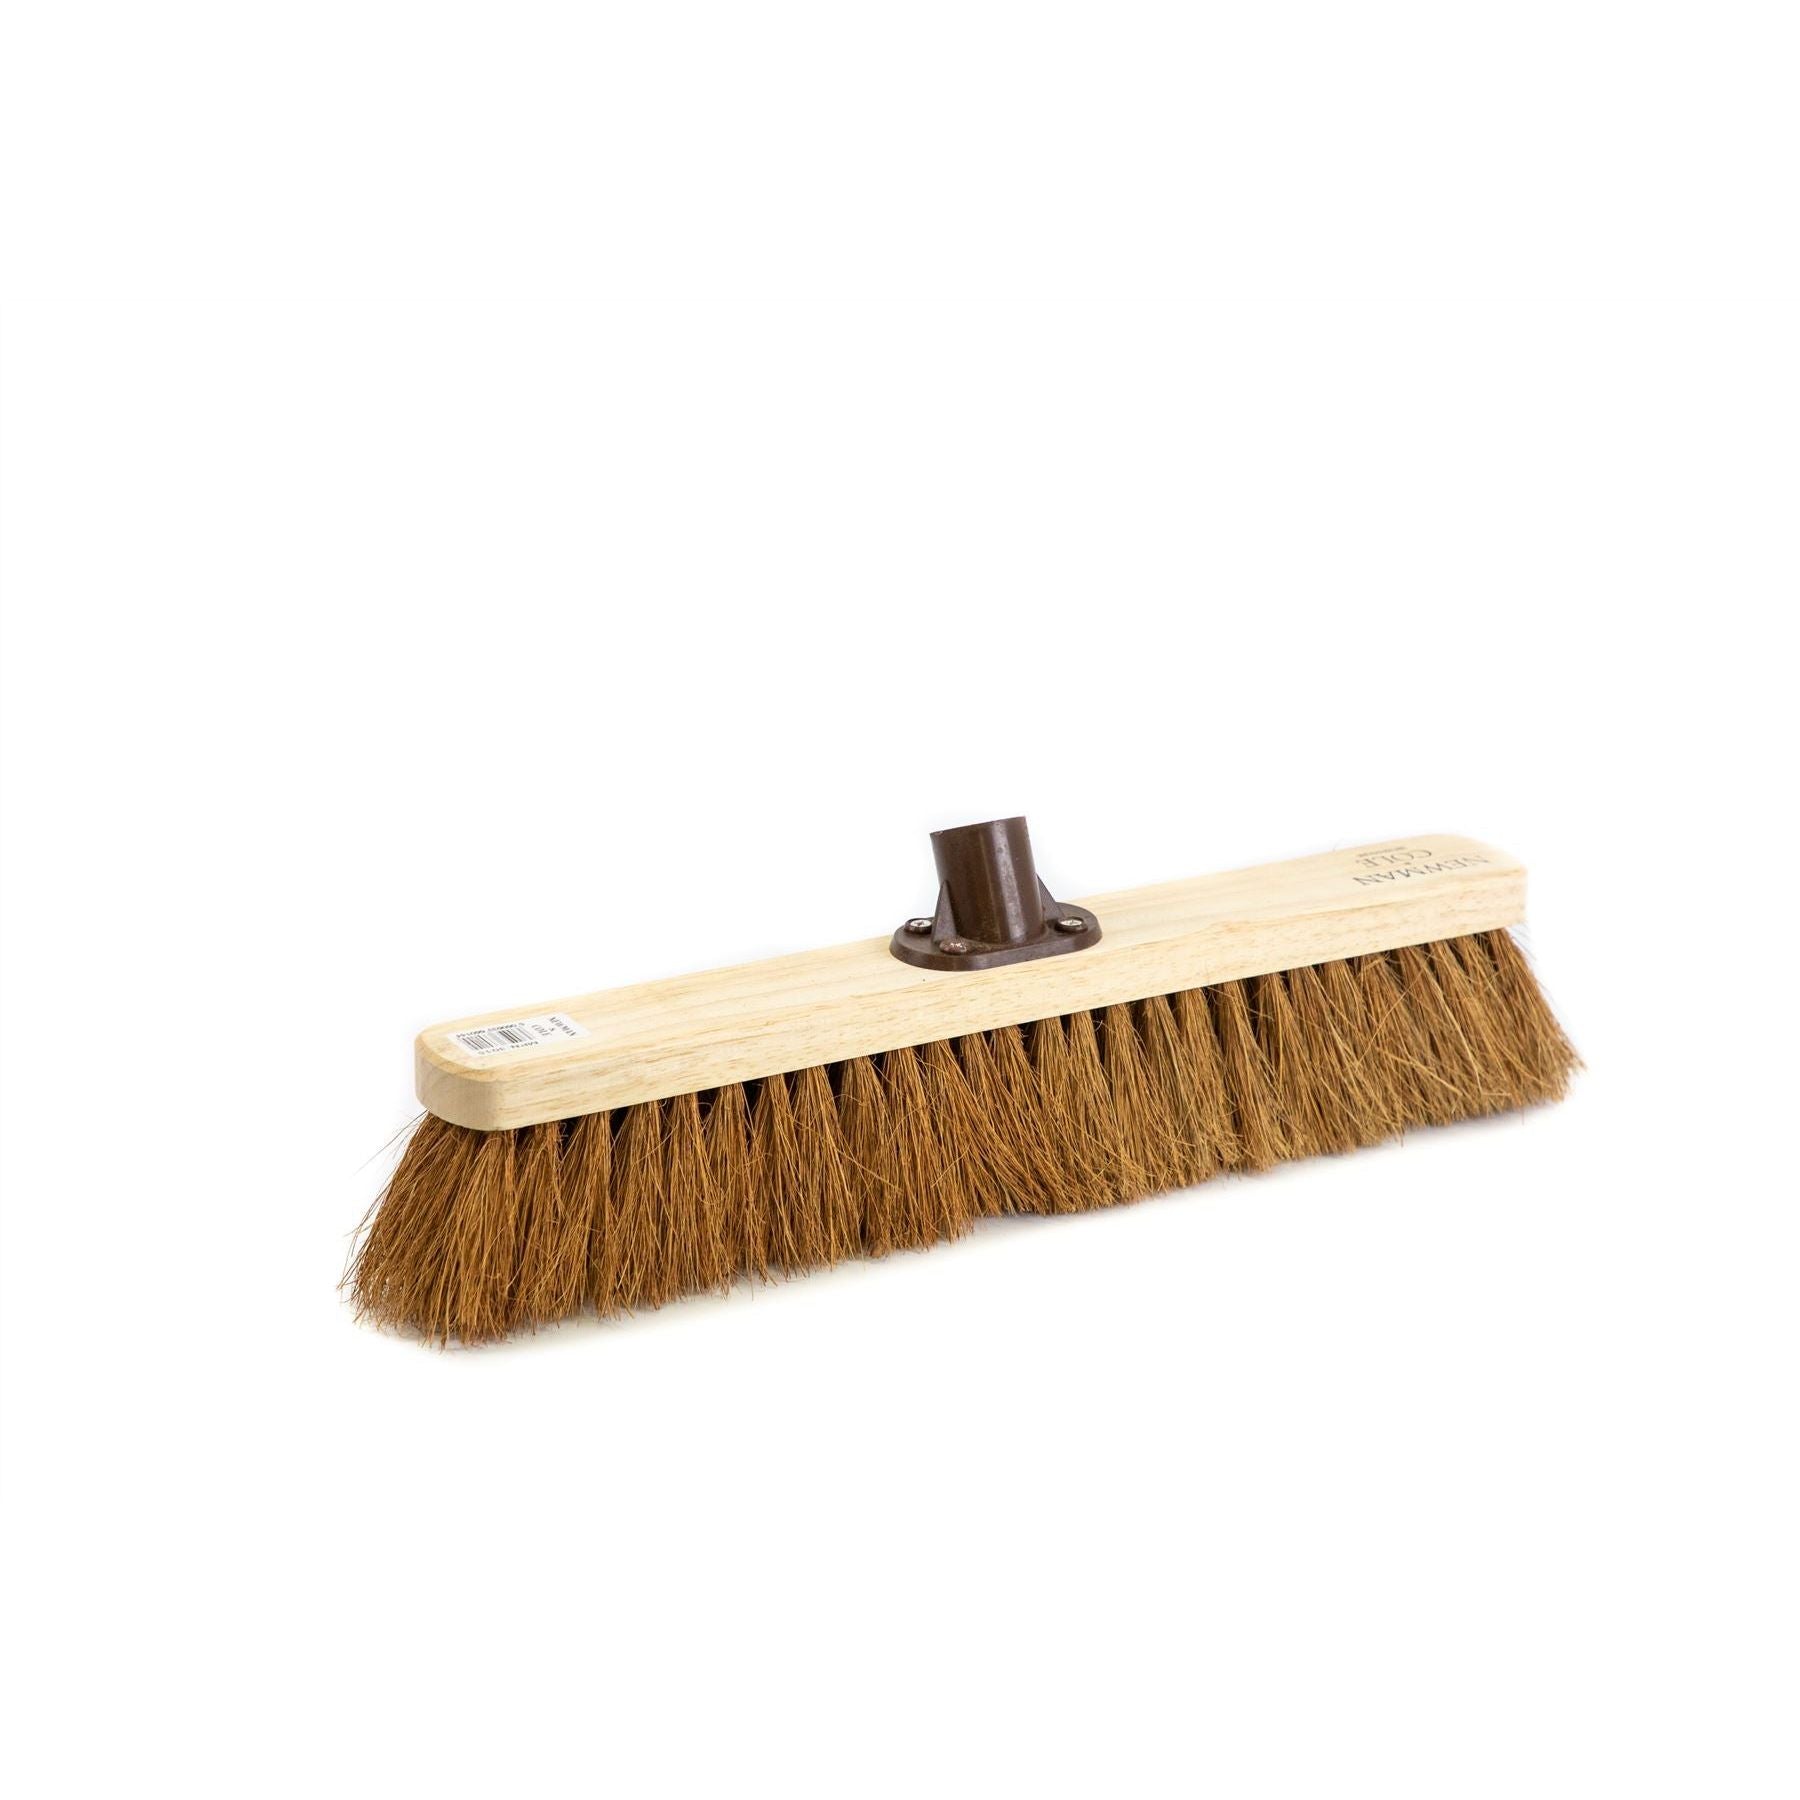 Newman and Cole 18" Natural Coco Broom Head with Plastic Socket Supplied with Handle